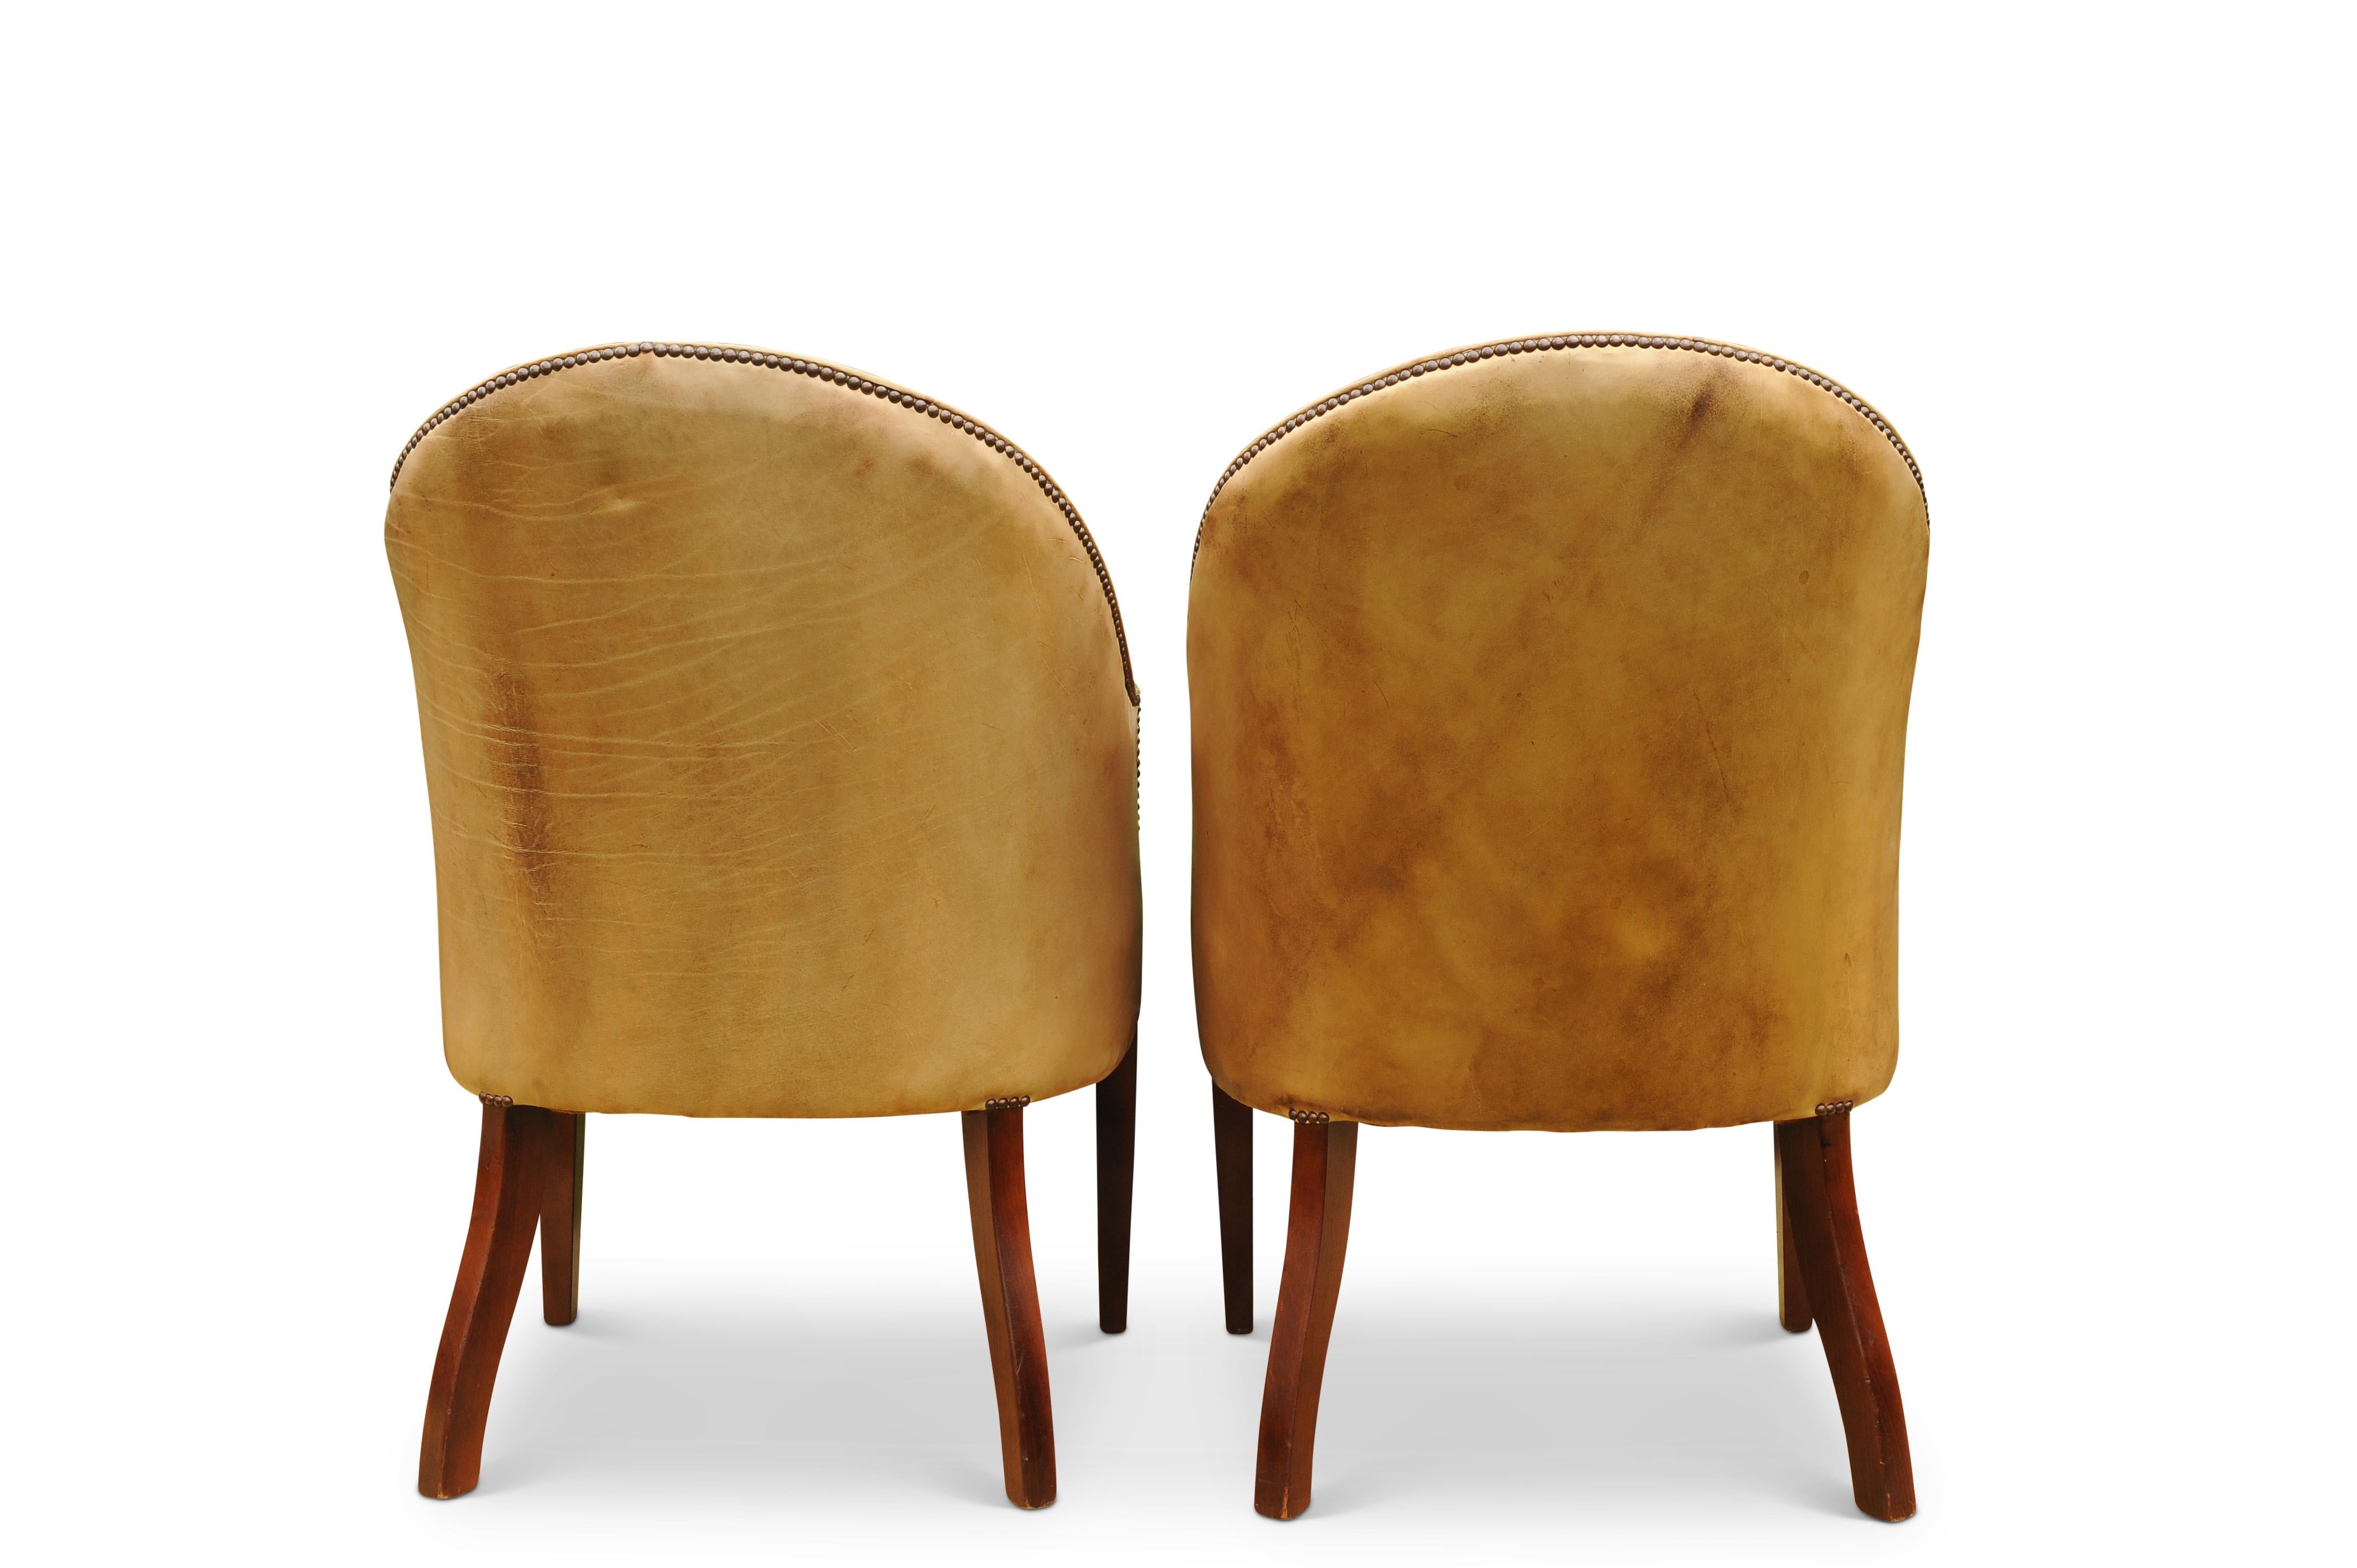 British Pair of Edwardian Library Chairs in a Pale Tan Leather with Brass Stud Border